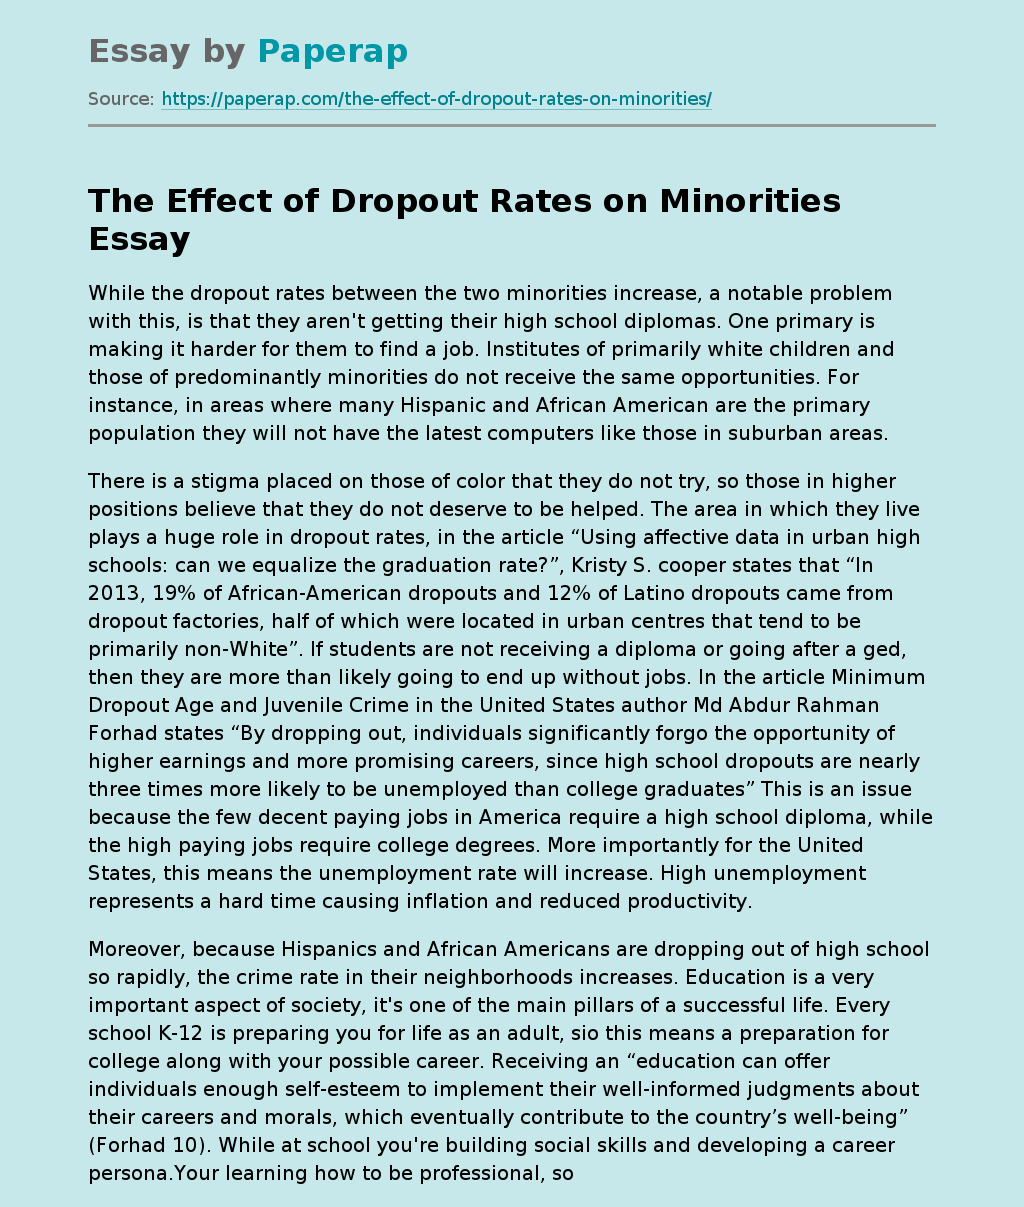 The Effect of Dropout Rates on Minorities